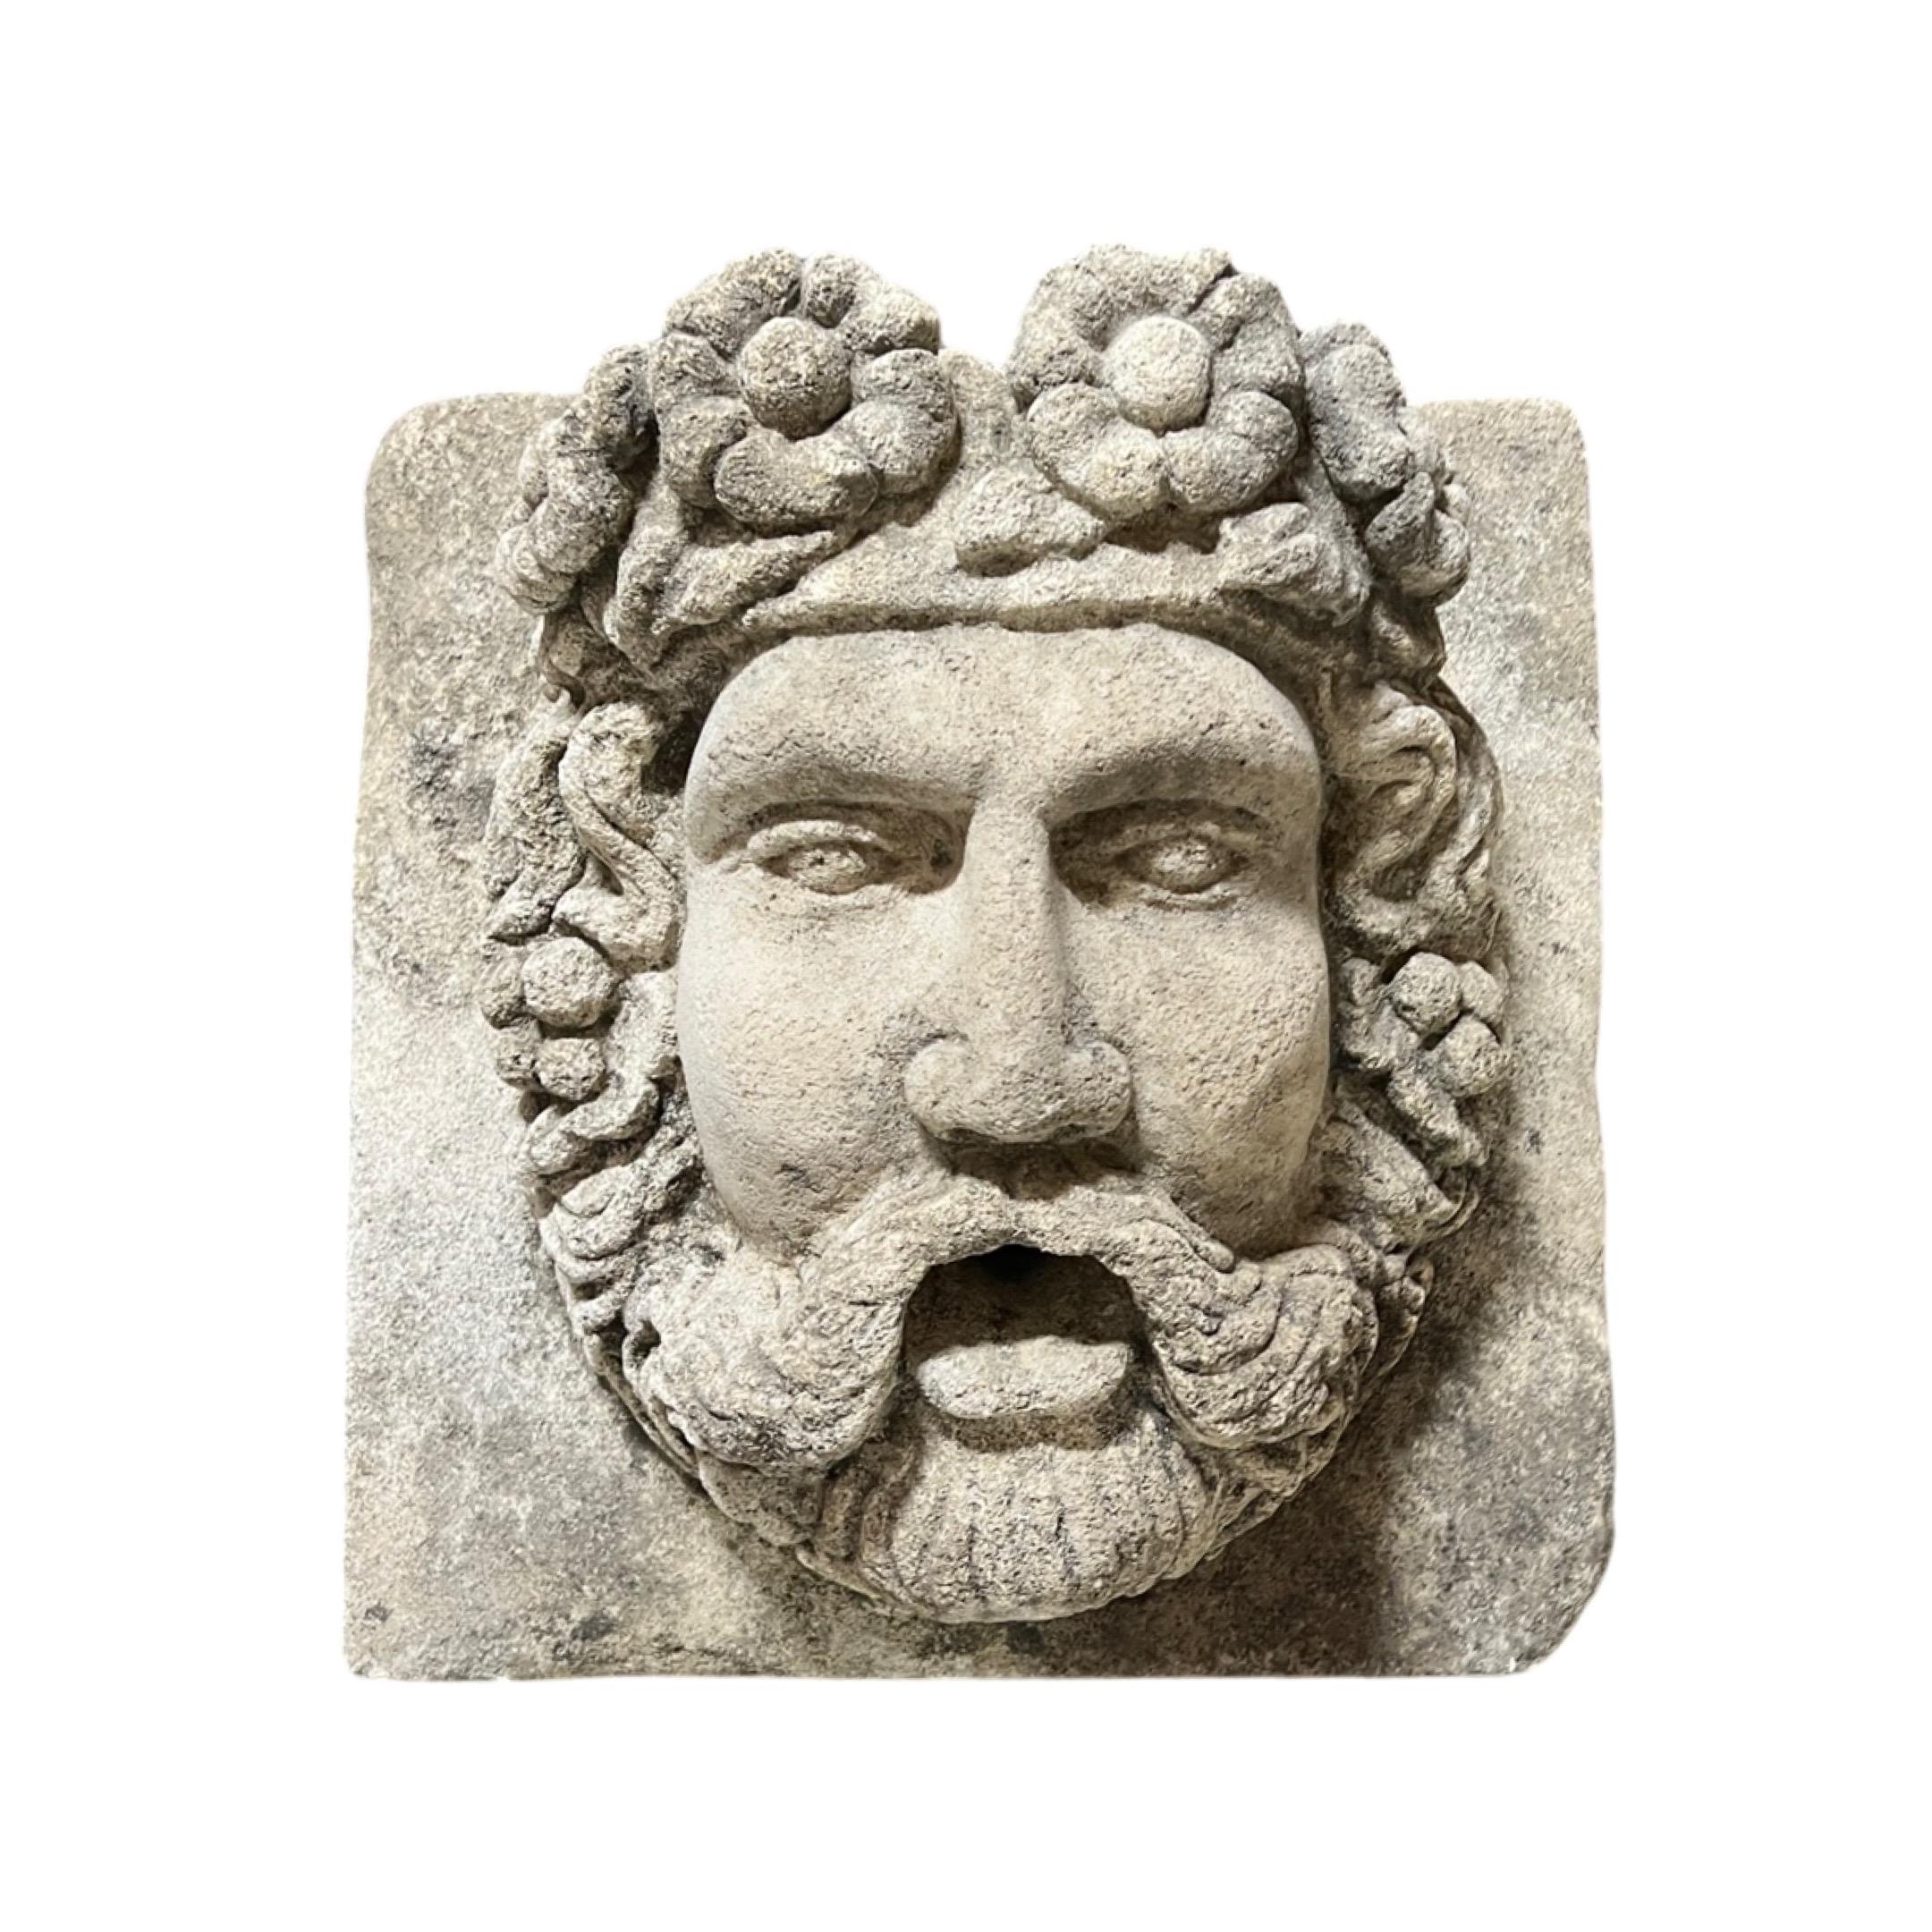 Water exit made of limestone. Hand-carved image depicts a God, Bacchus.